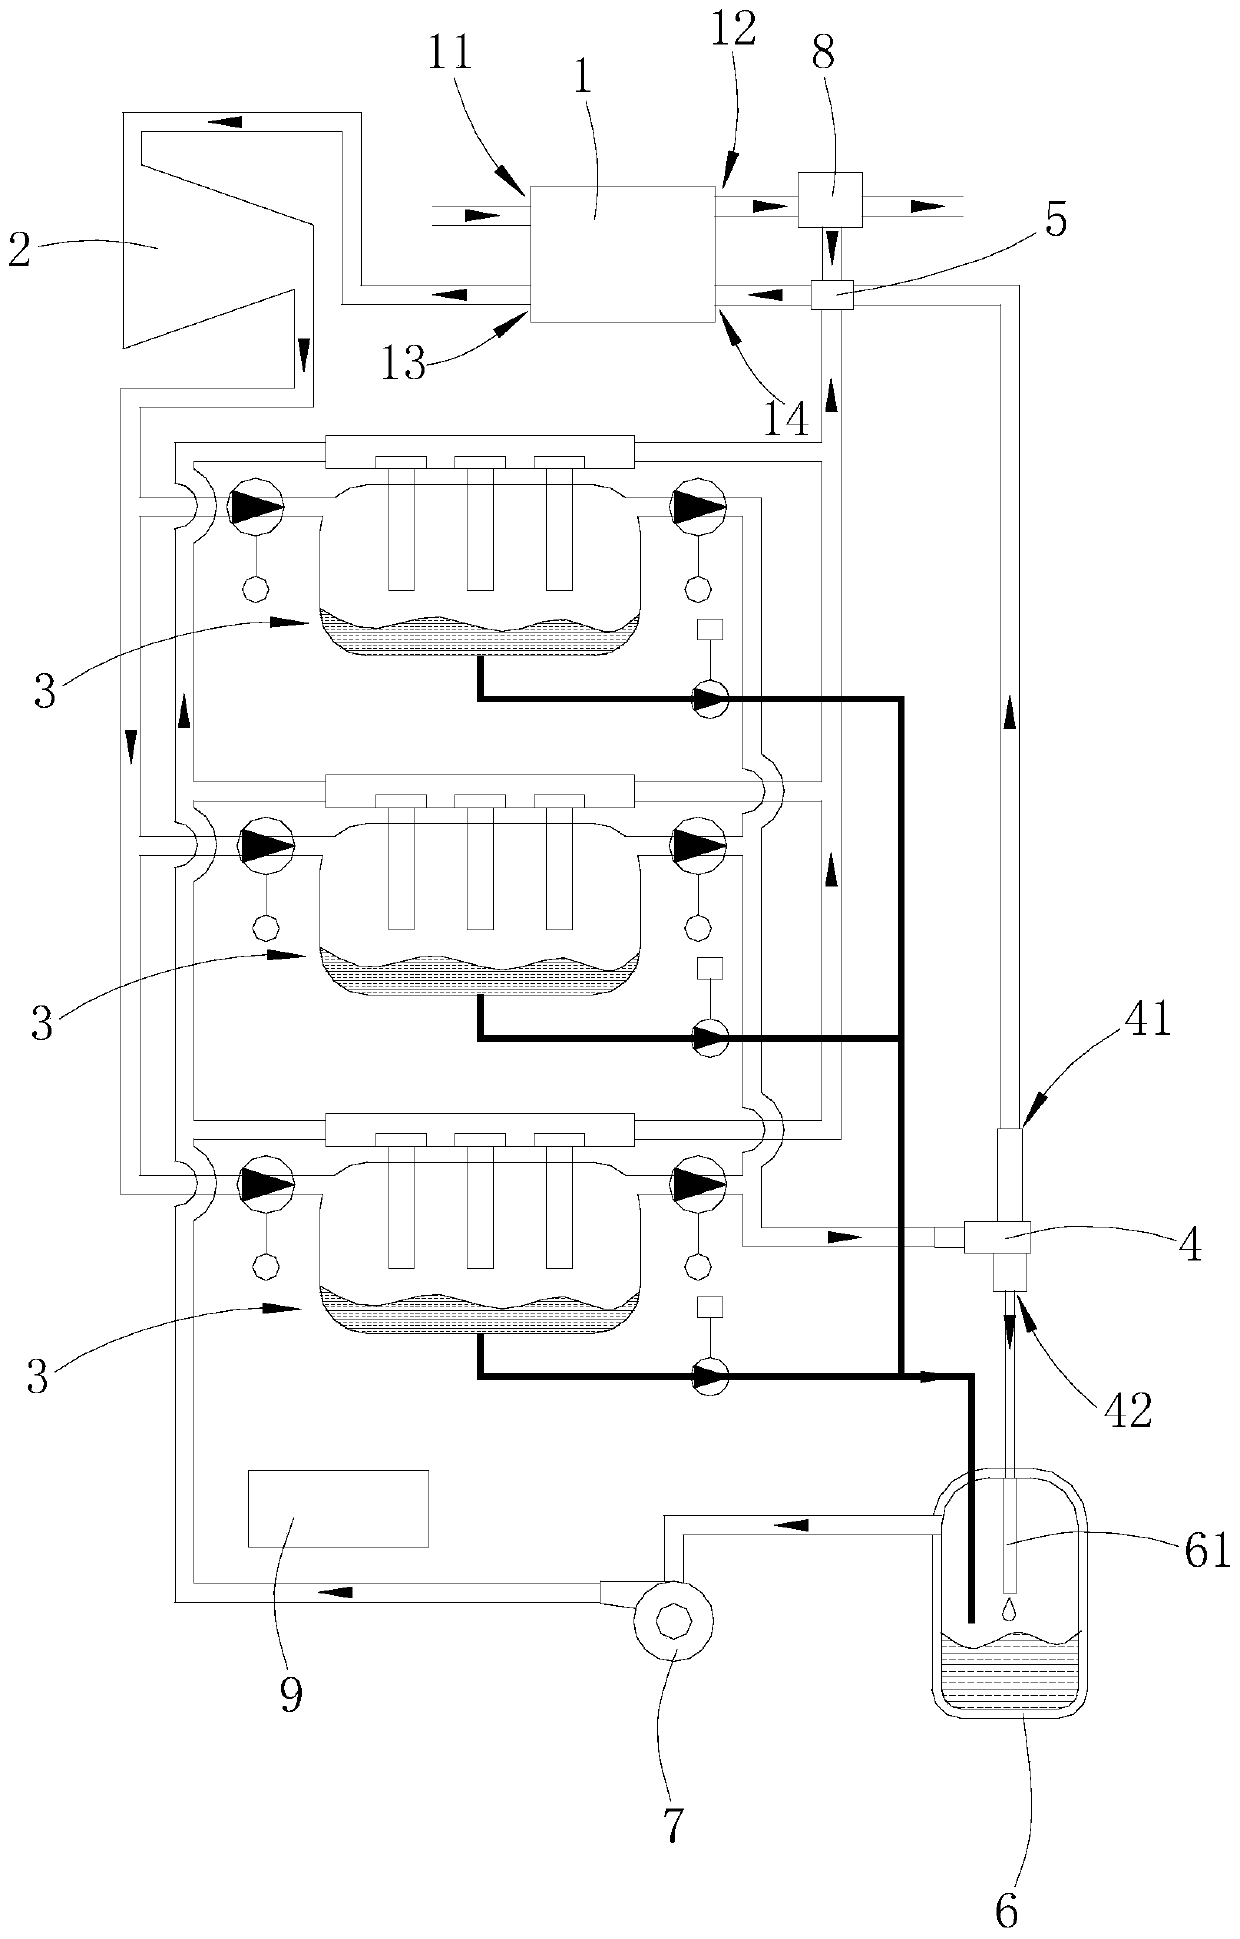 Novel composite water production device